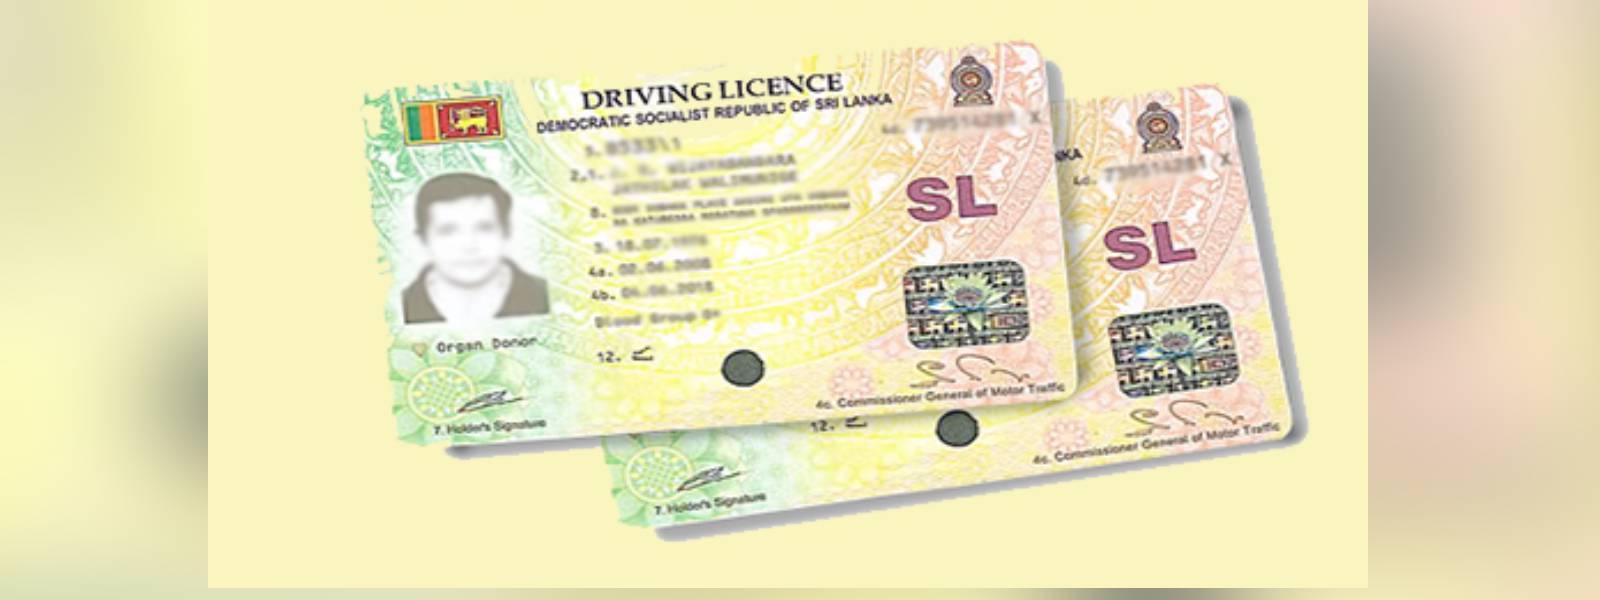 Driver’s license validity period extended by three months